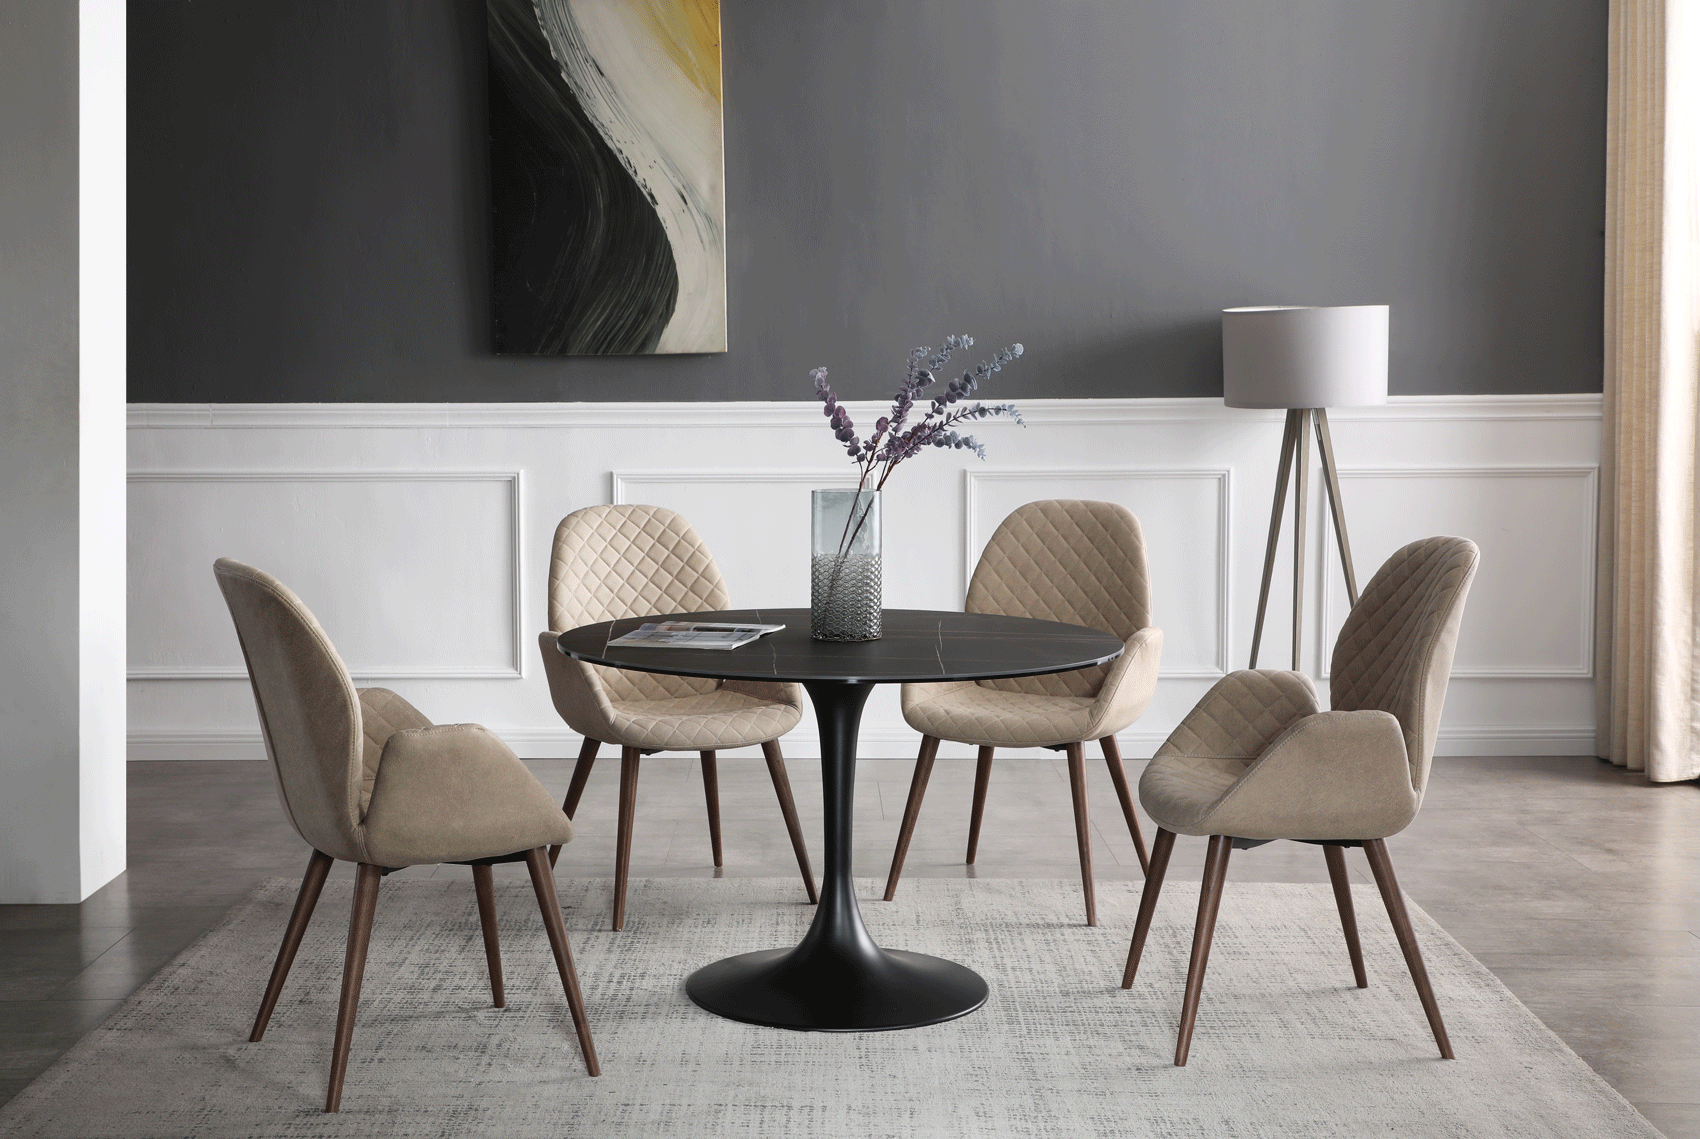 Dining Room Furniture Swivel Chairs 9088 Ceramic Dining Table